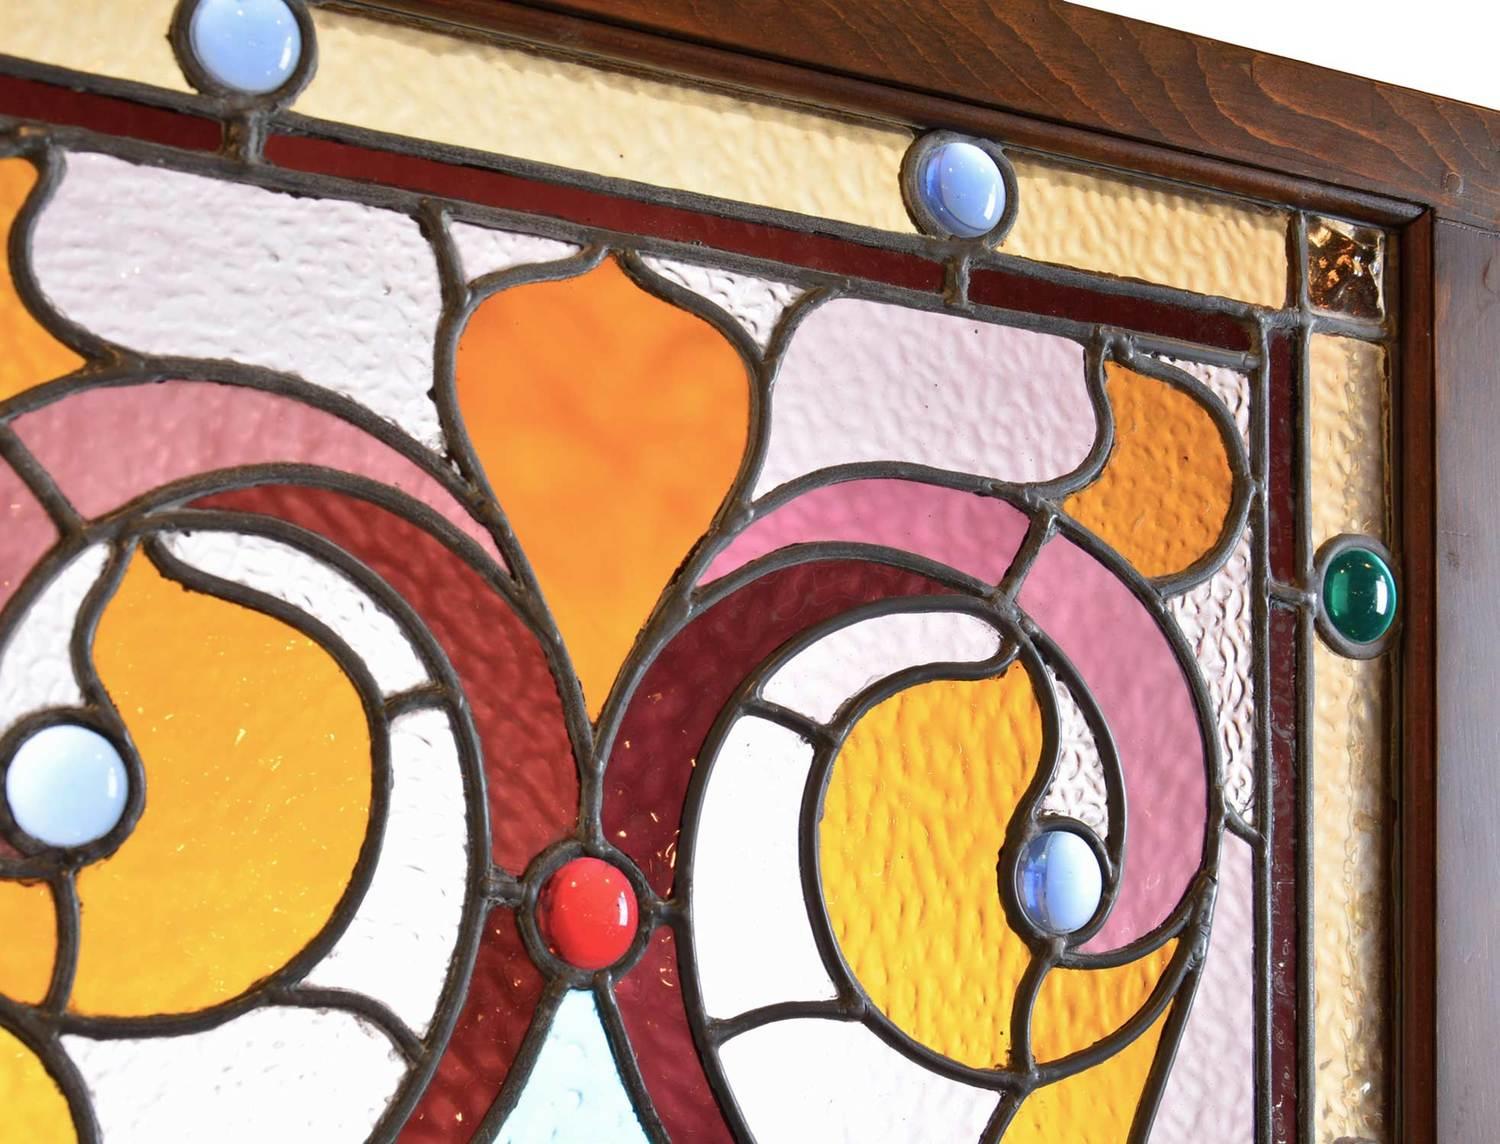 Made circa 1895, this vibrant stained glass window has Victorian scrolling, stylized fleur-de-lis, a beveled center, and ten round red and blue jewels incorporated into the design. The amber glass border has another 18 blue and green jewels with